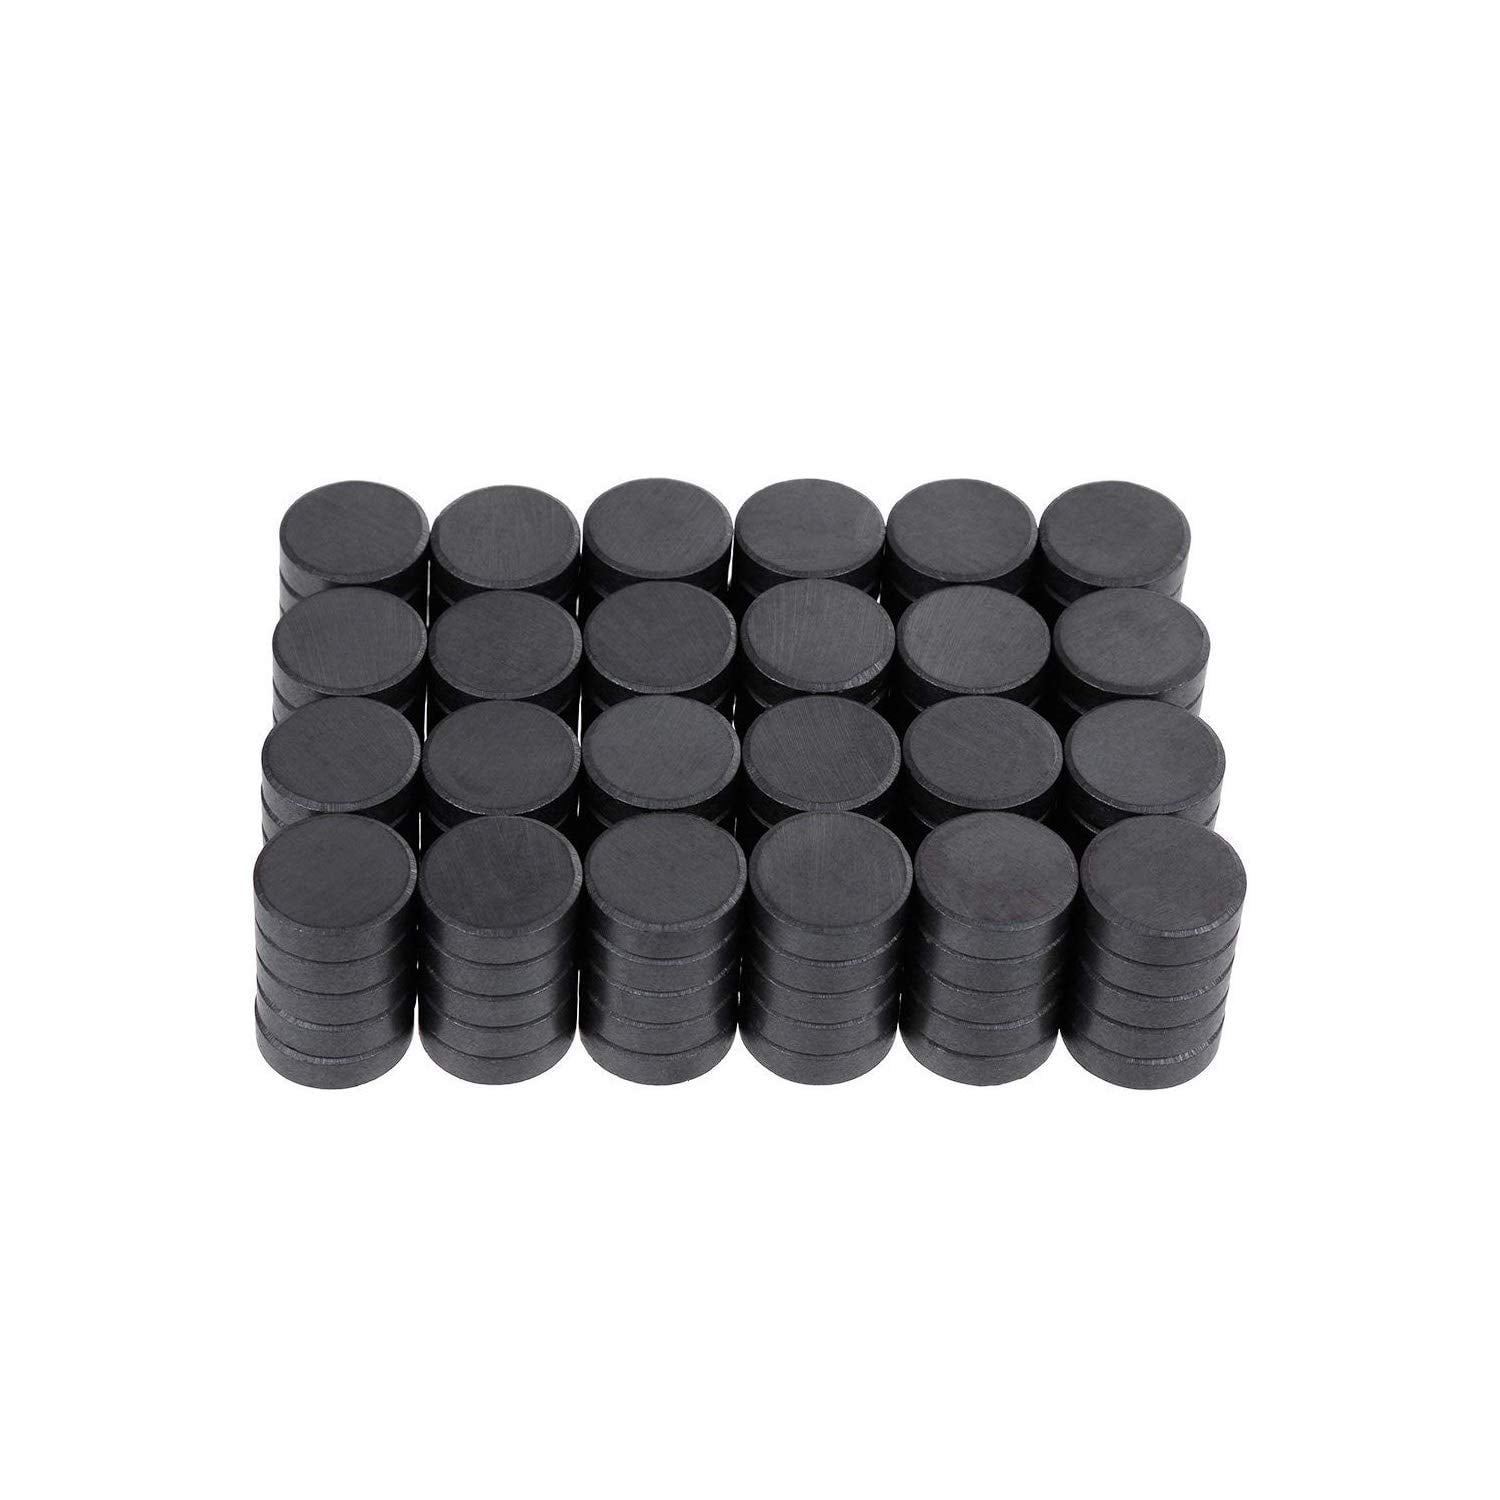 18x4mm-27pcs, Black cutequeen Round Ceramic Industrial ferrite Magnets for Hobbies,Crafts and Science